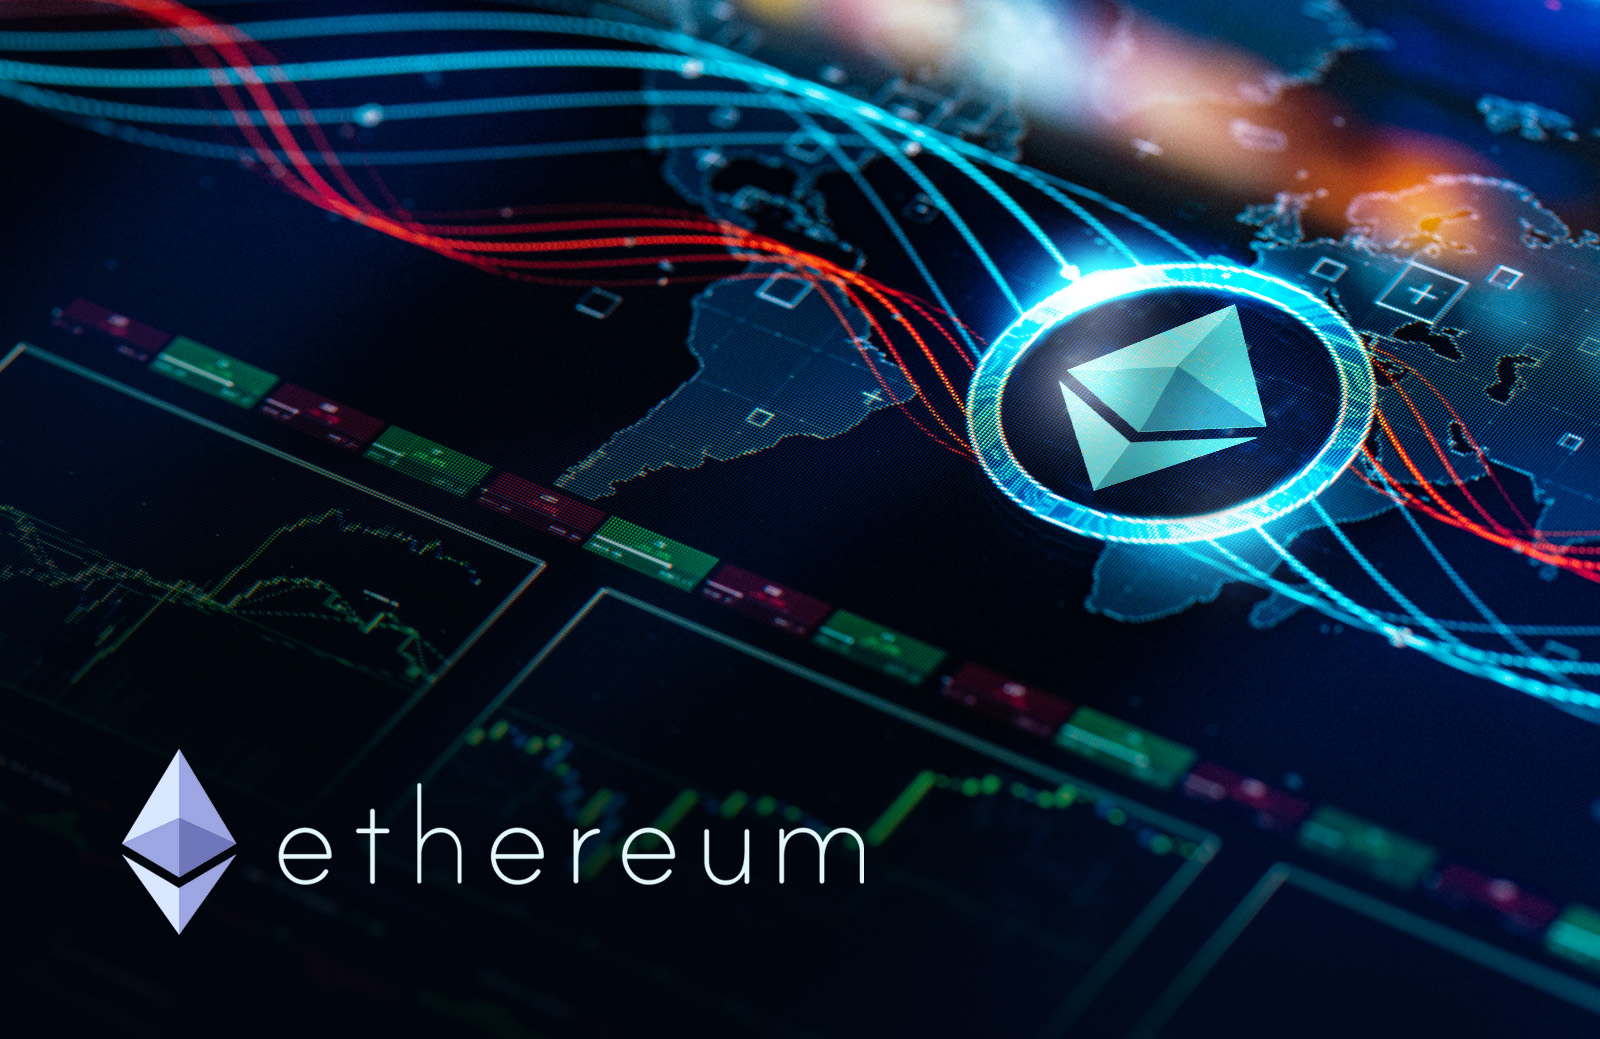 Ethereum featured image composite of logo on dynamic, computerized background featured Image